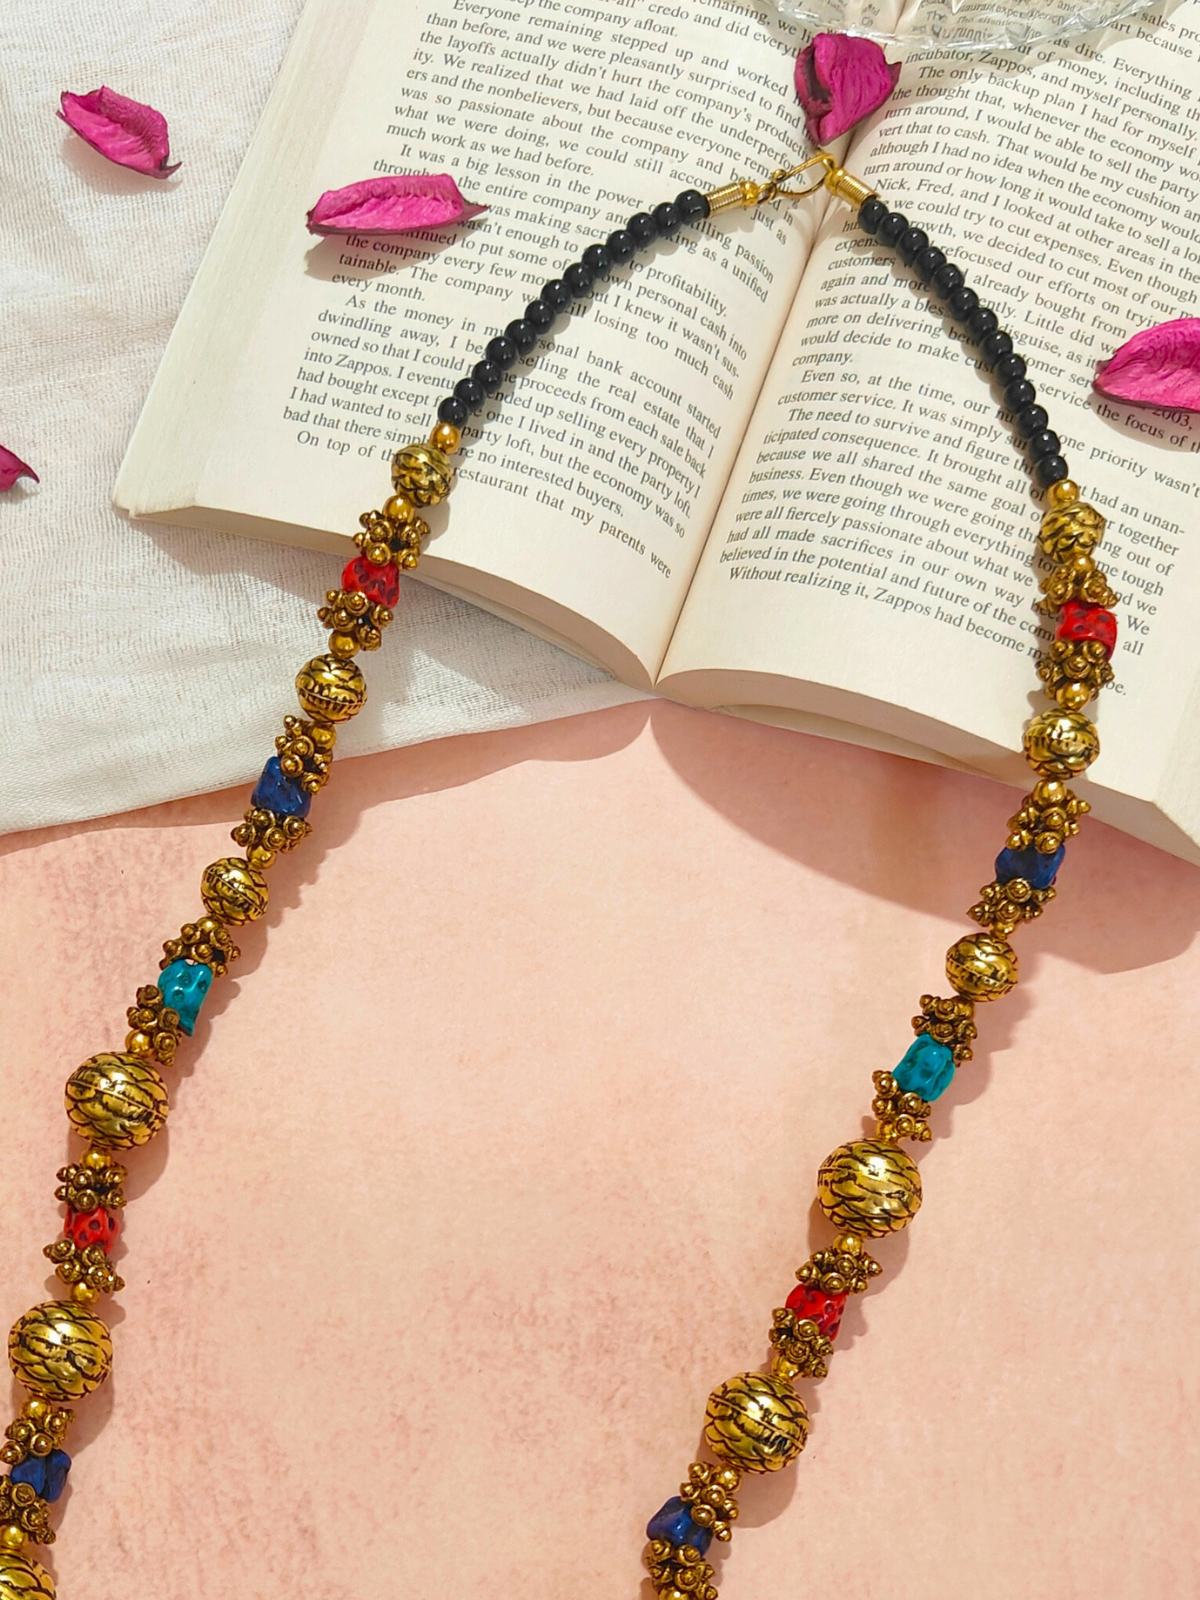 The Replenished Aparajita Necklace with Mulicolor Beads